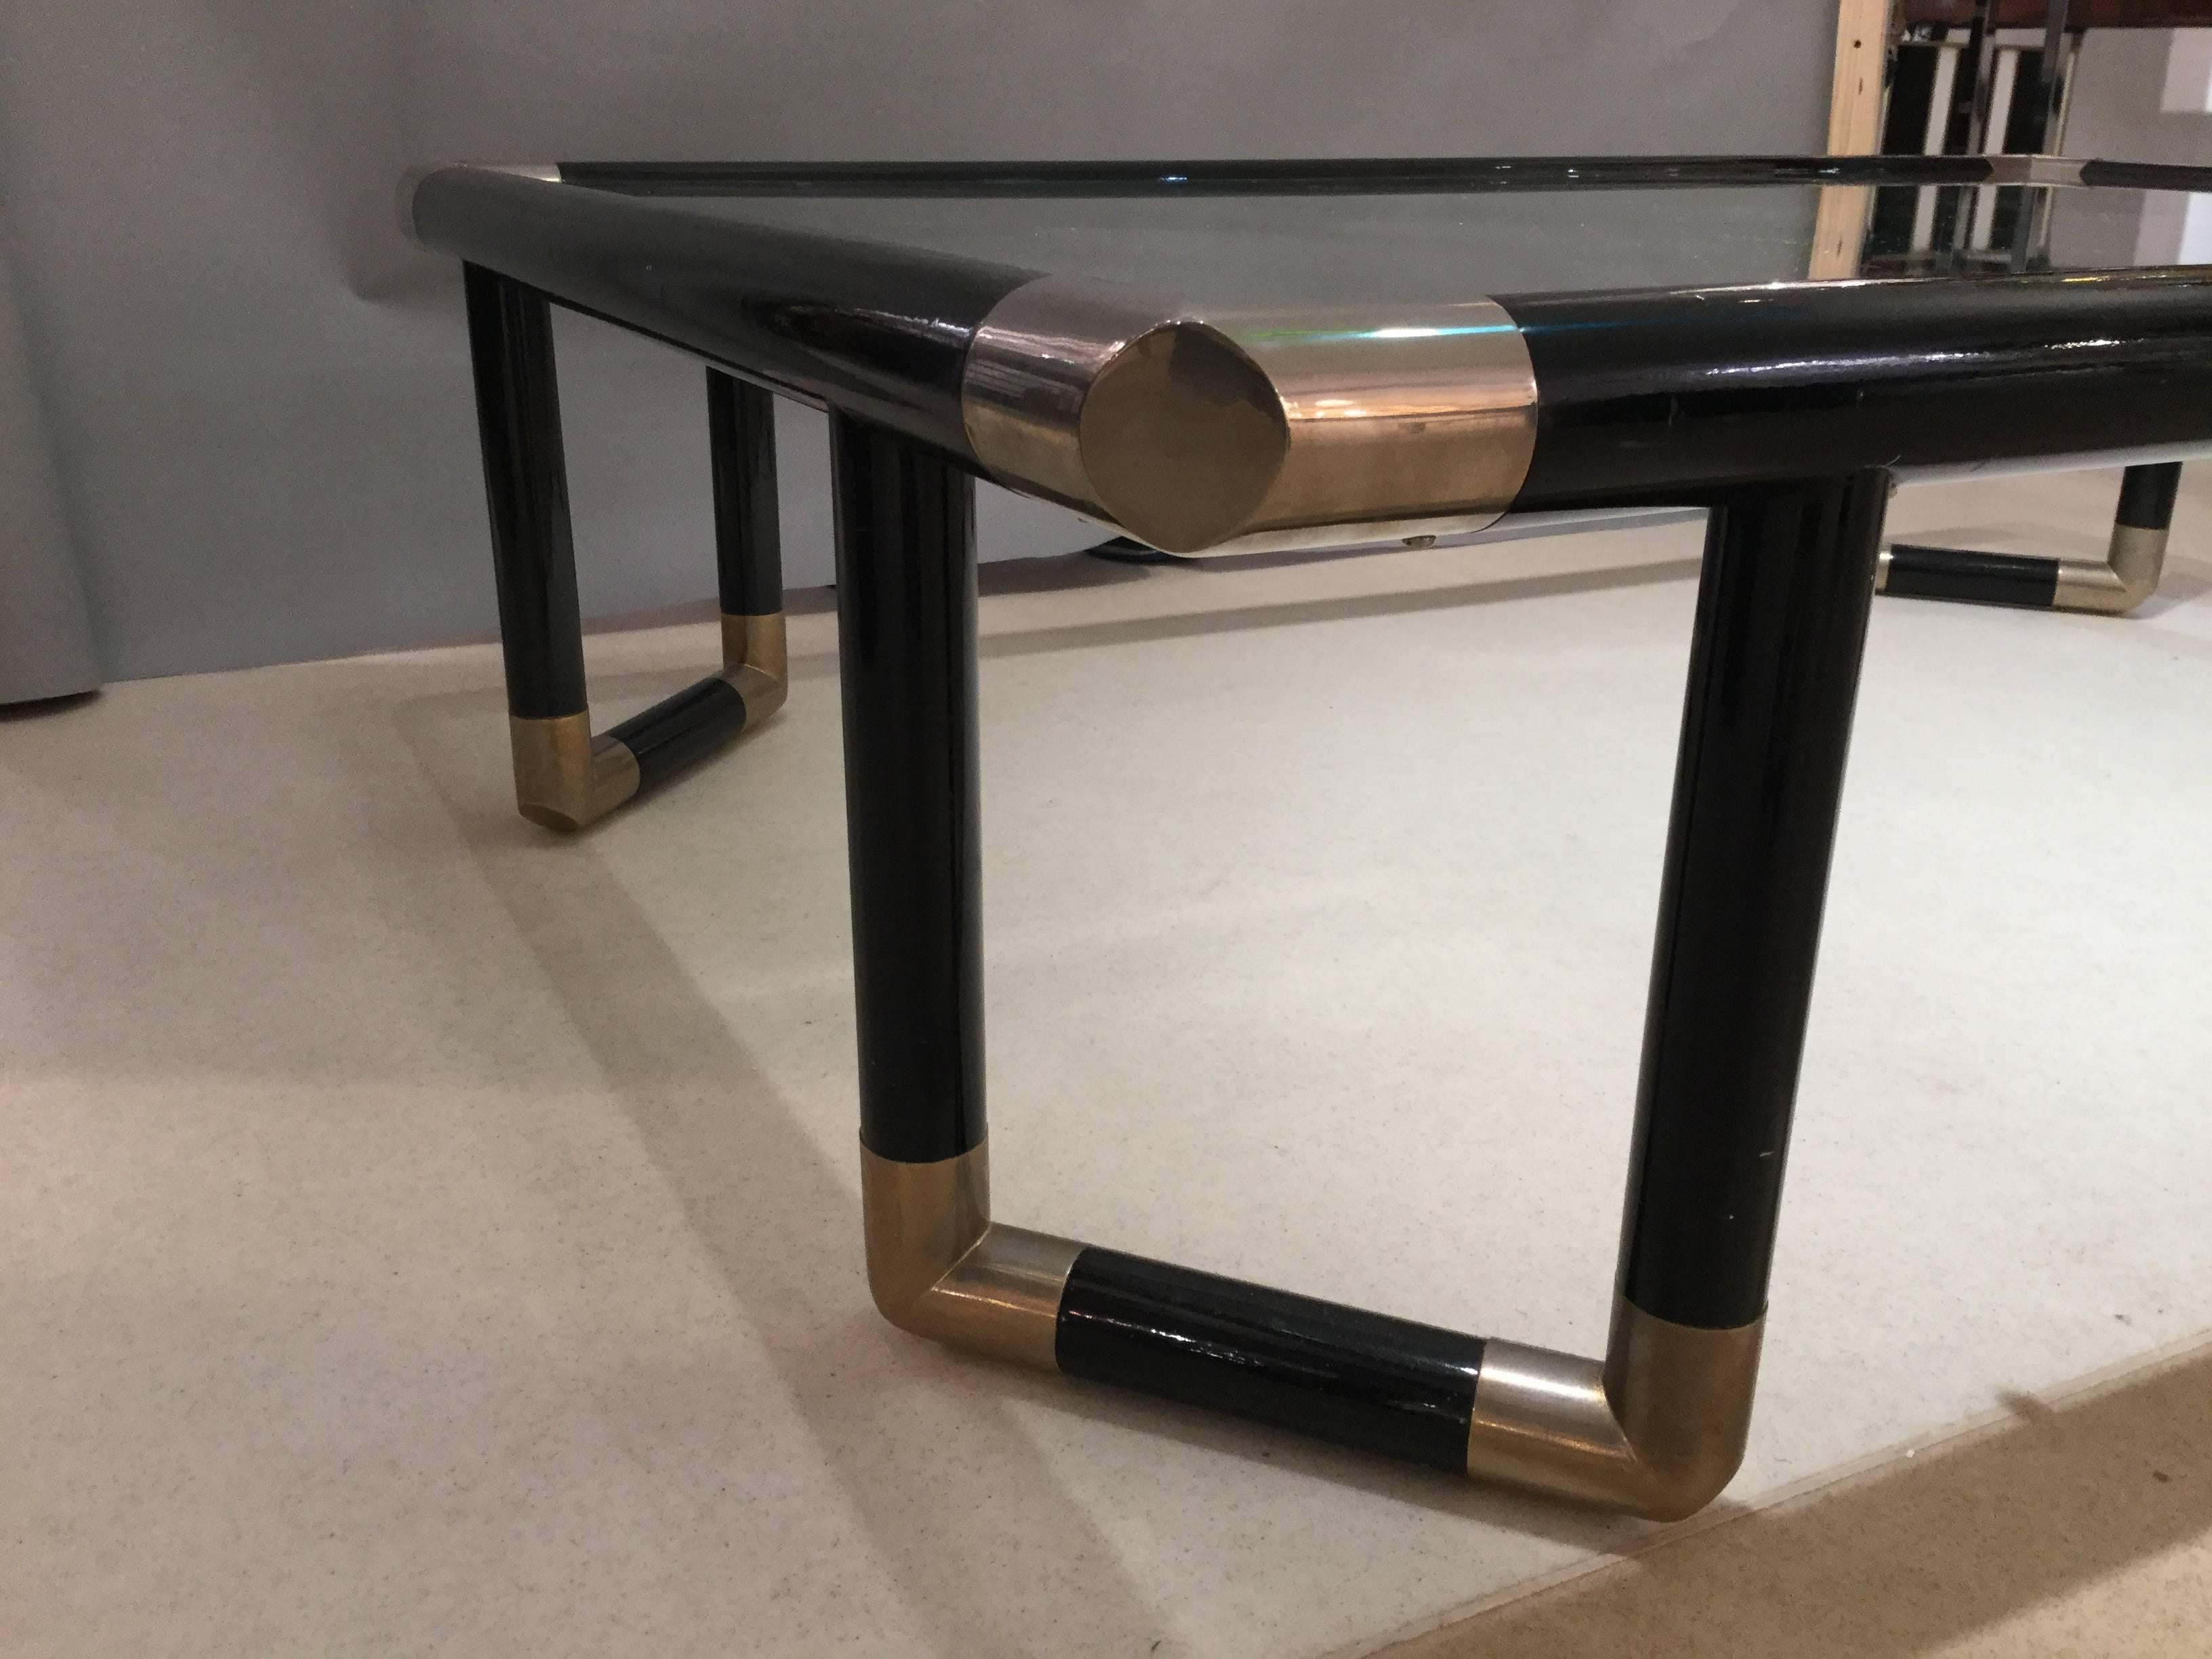 1970 Italian coffee table in black lacquered wood with nickel-plated details and glass top.